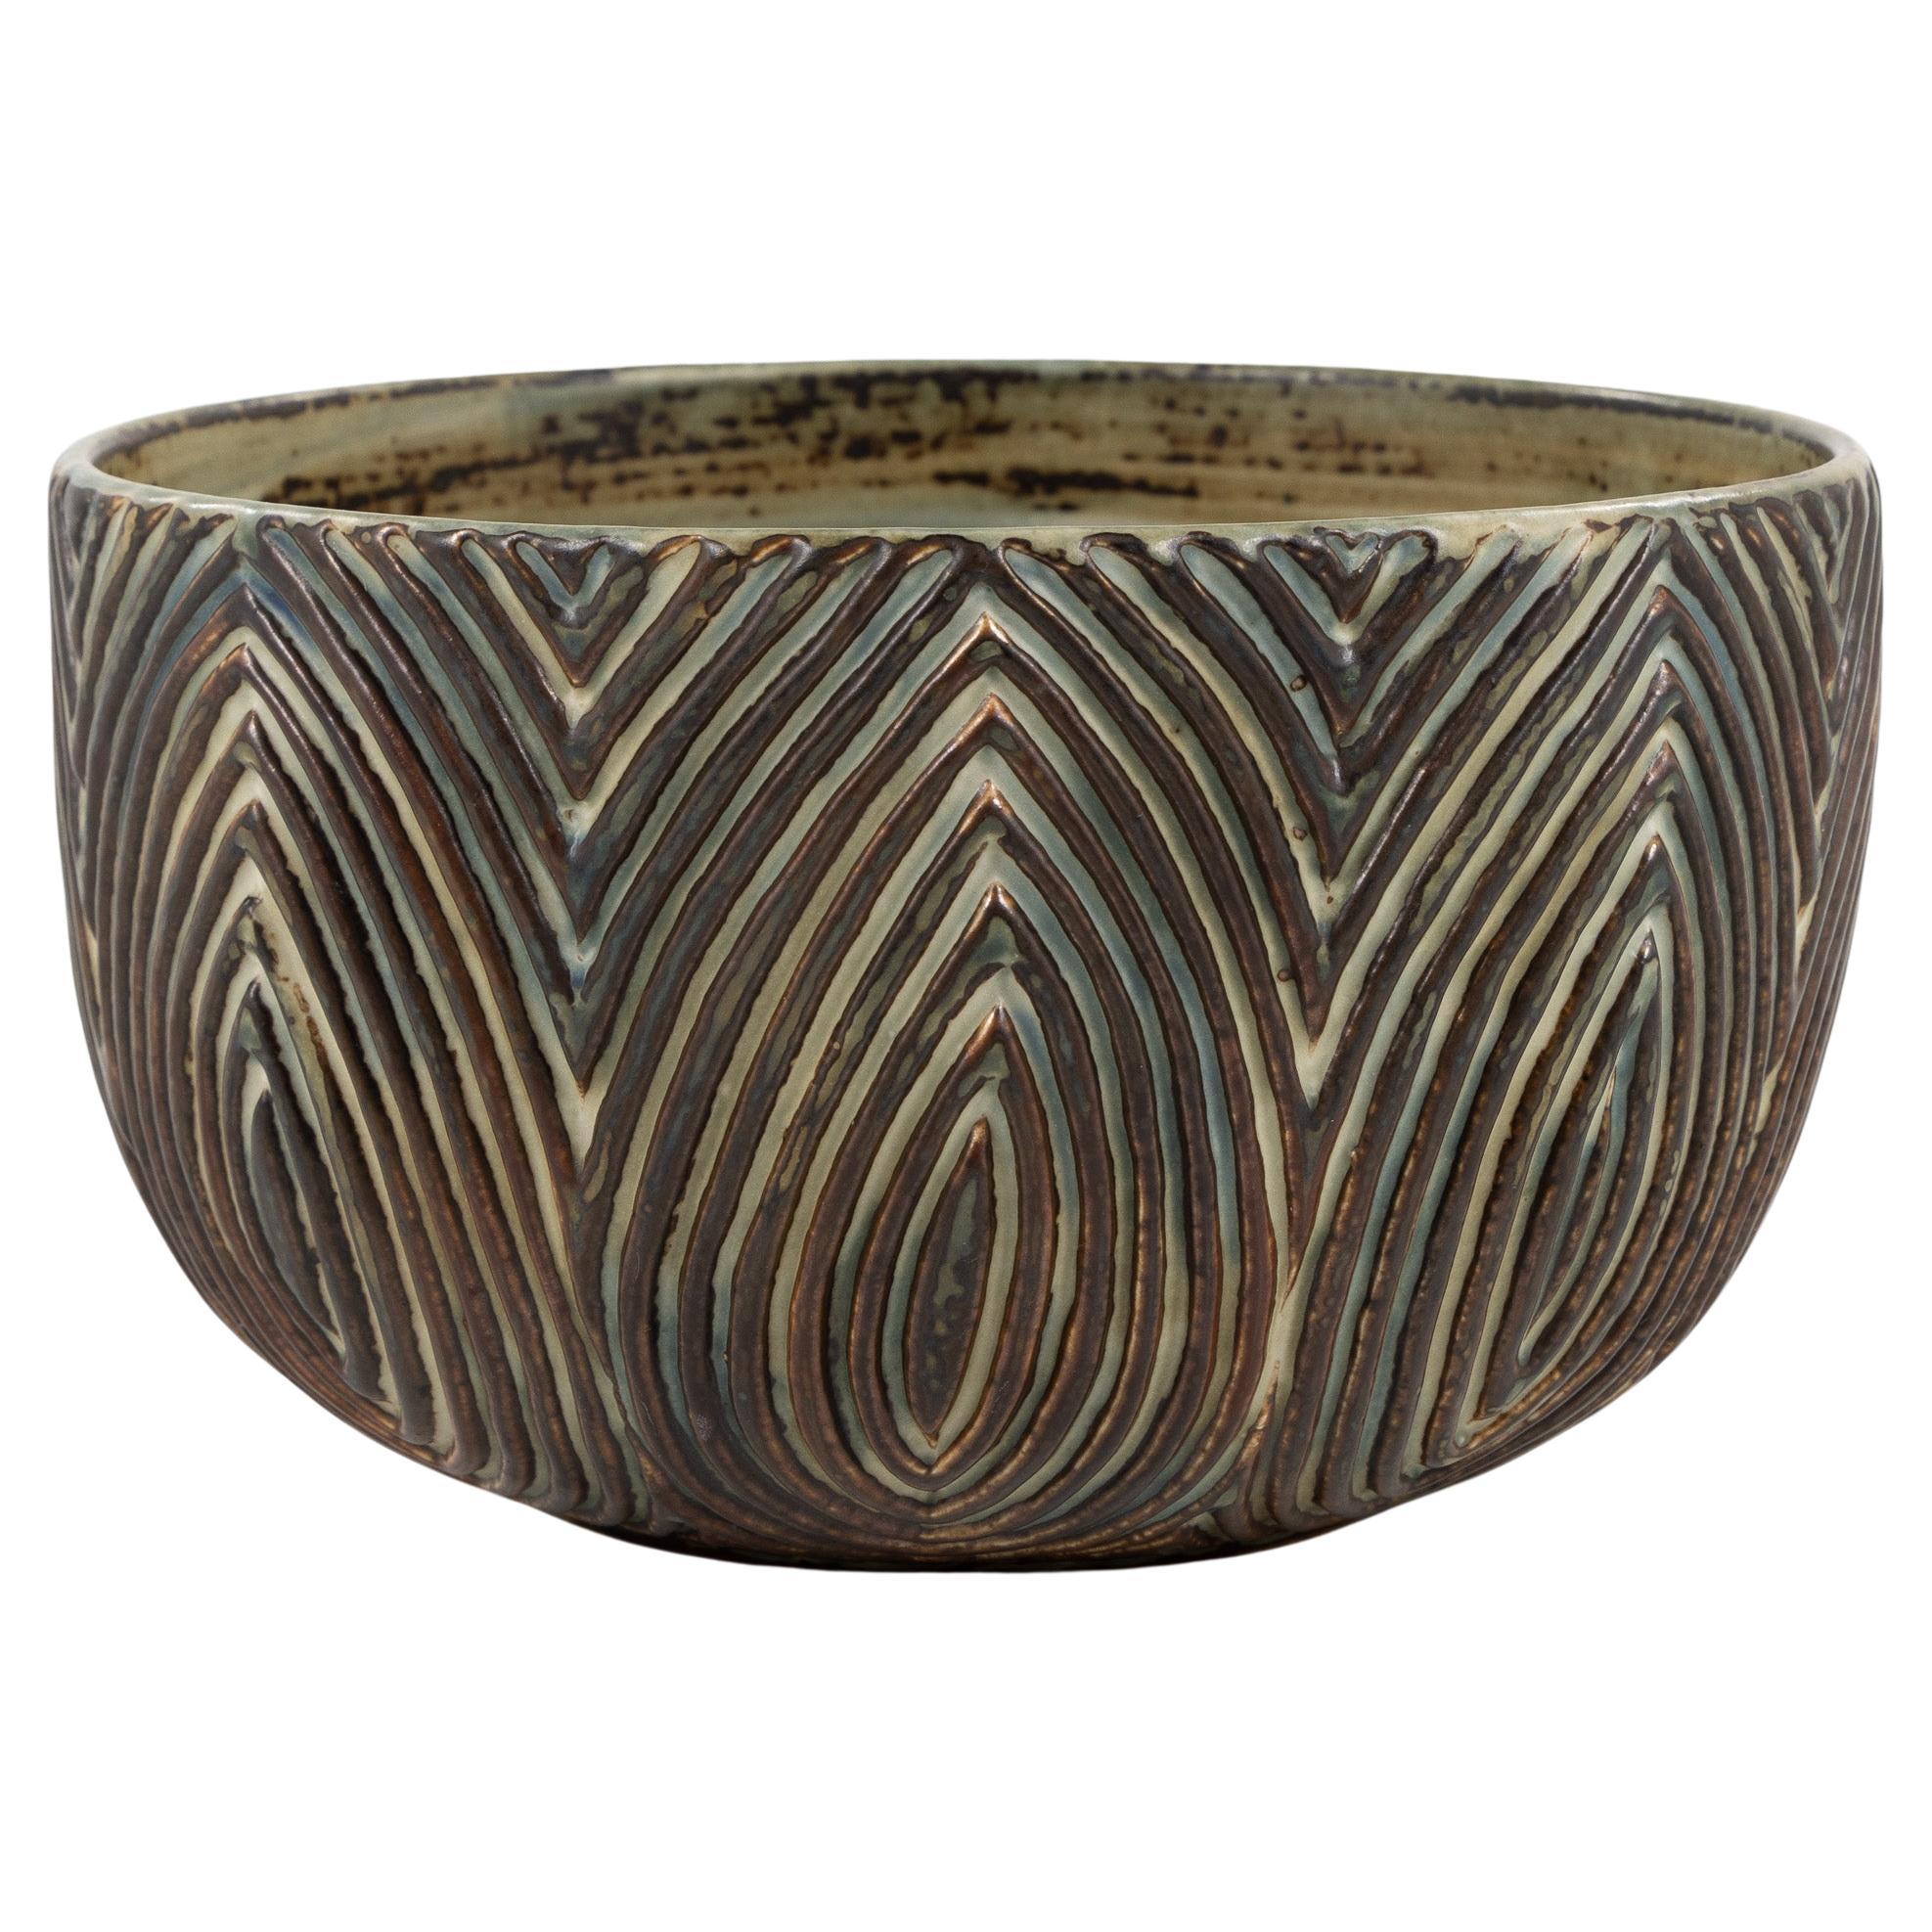 Axel Salto bowl in fluted stoneware